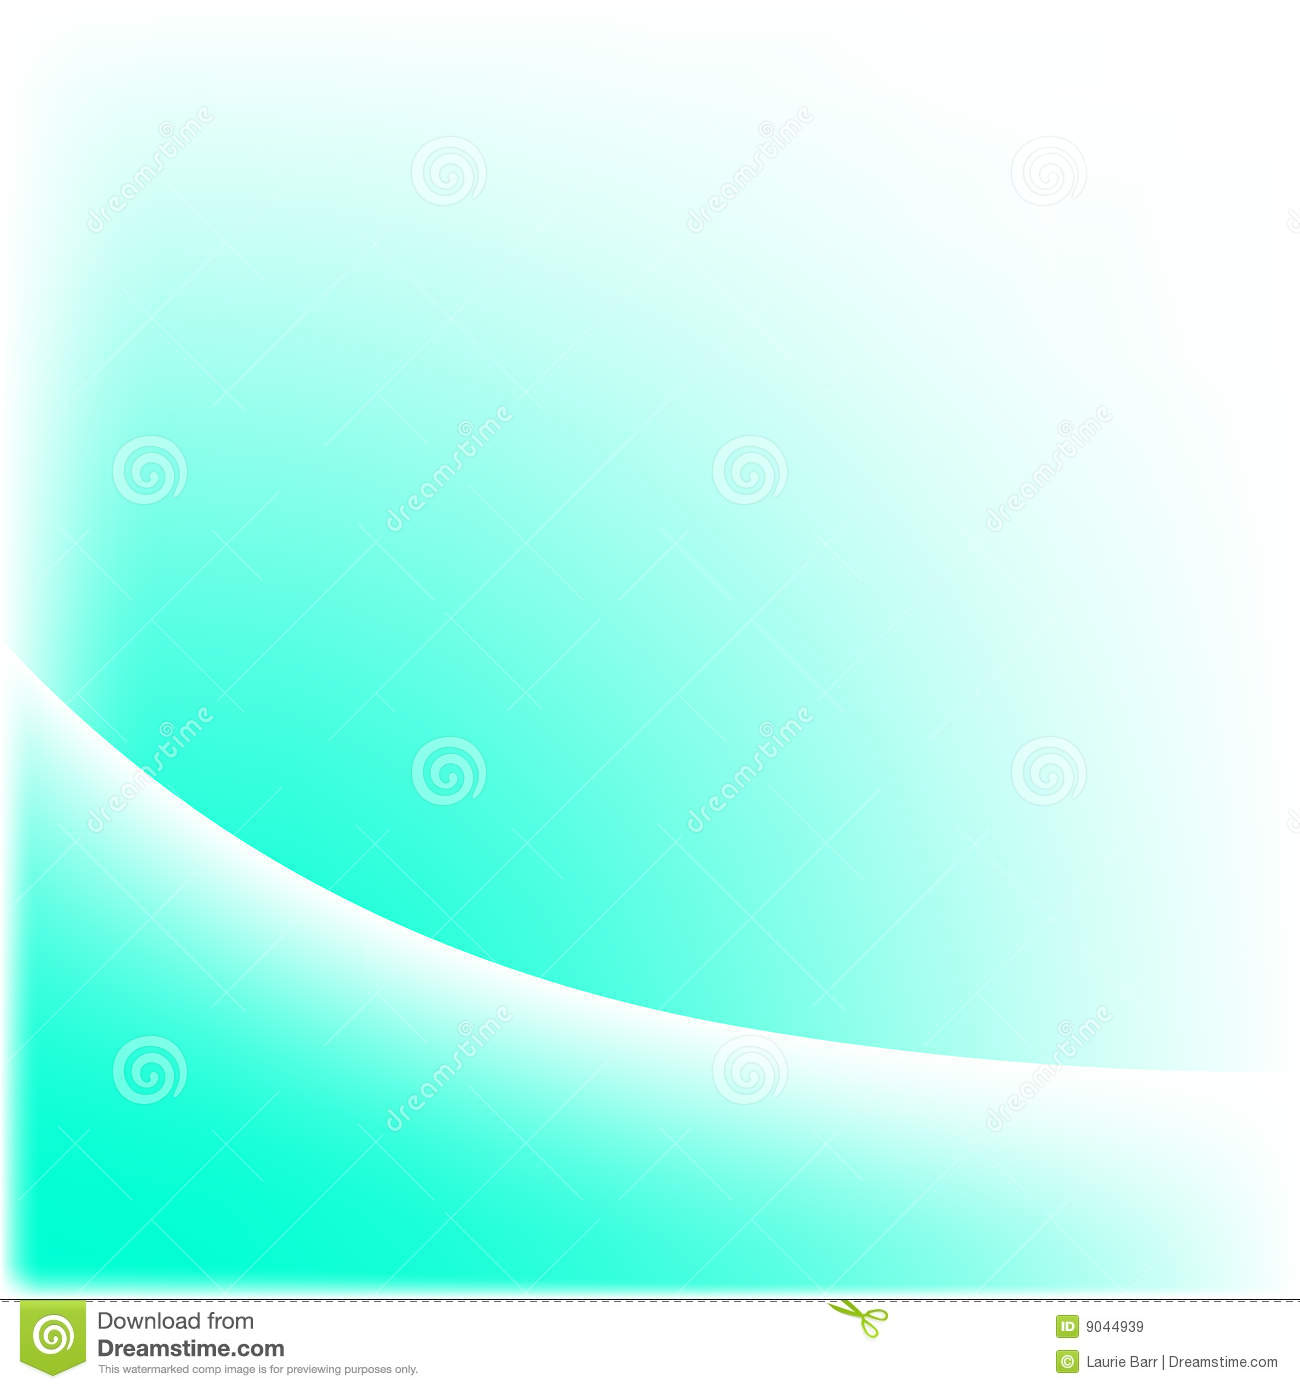 HQ Turquoise White Wallpapers | File 69.09Kb